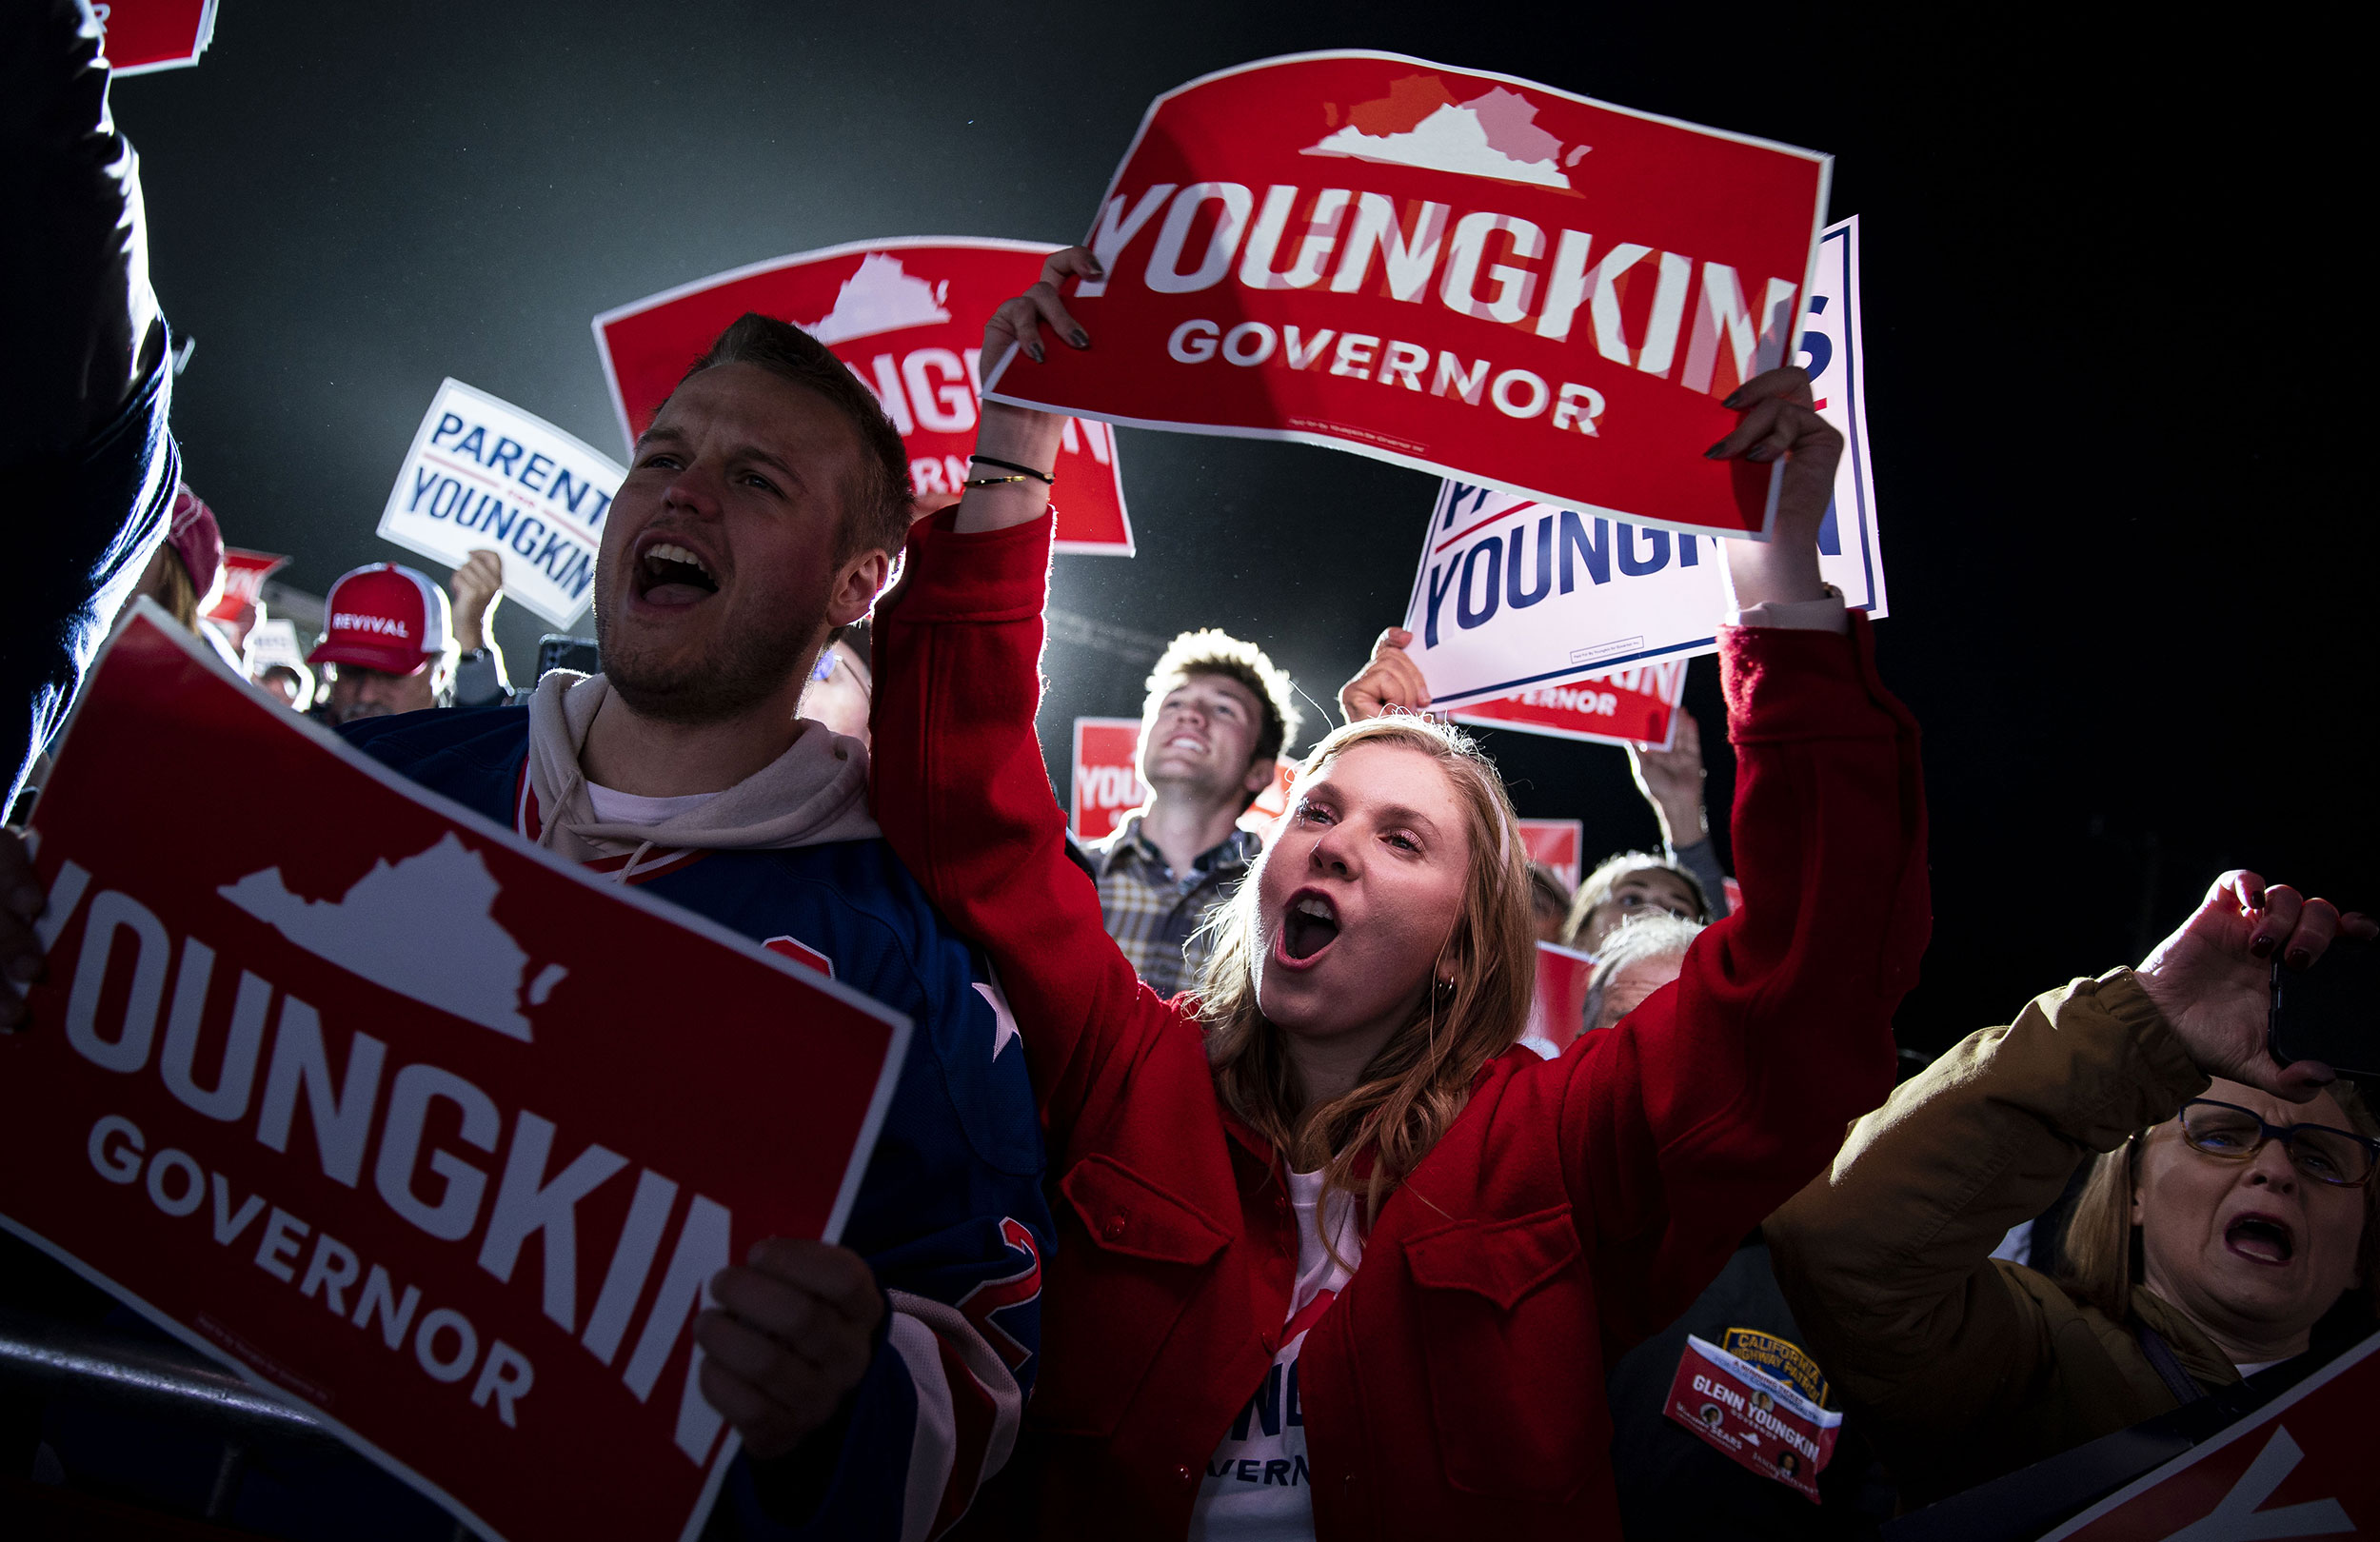 People cheer during a campaign rally for Virginia Republican gubernatorial candidate Glenn Youngkin in Leesburg, Virginia, on Monday, November 1.